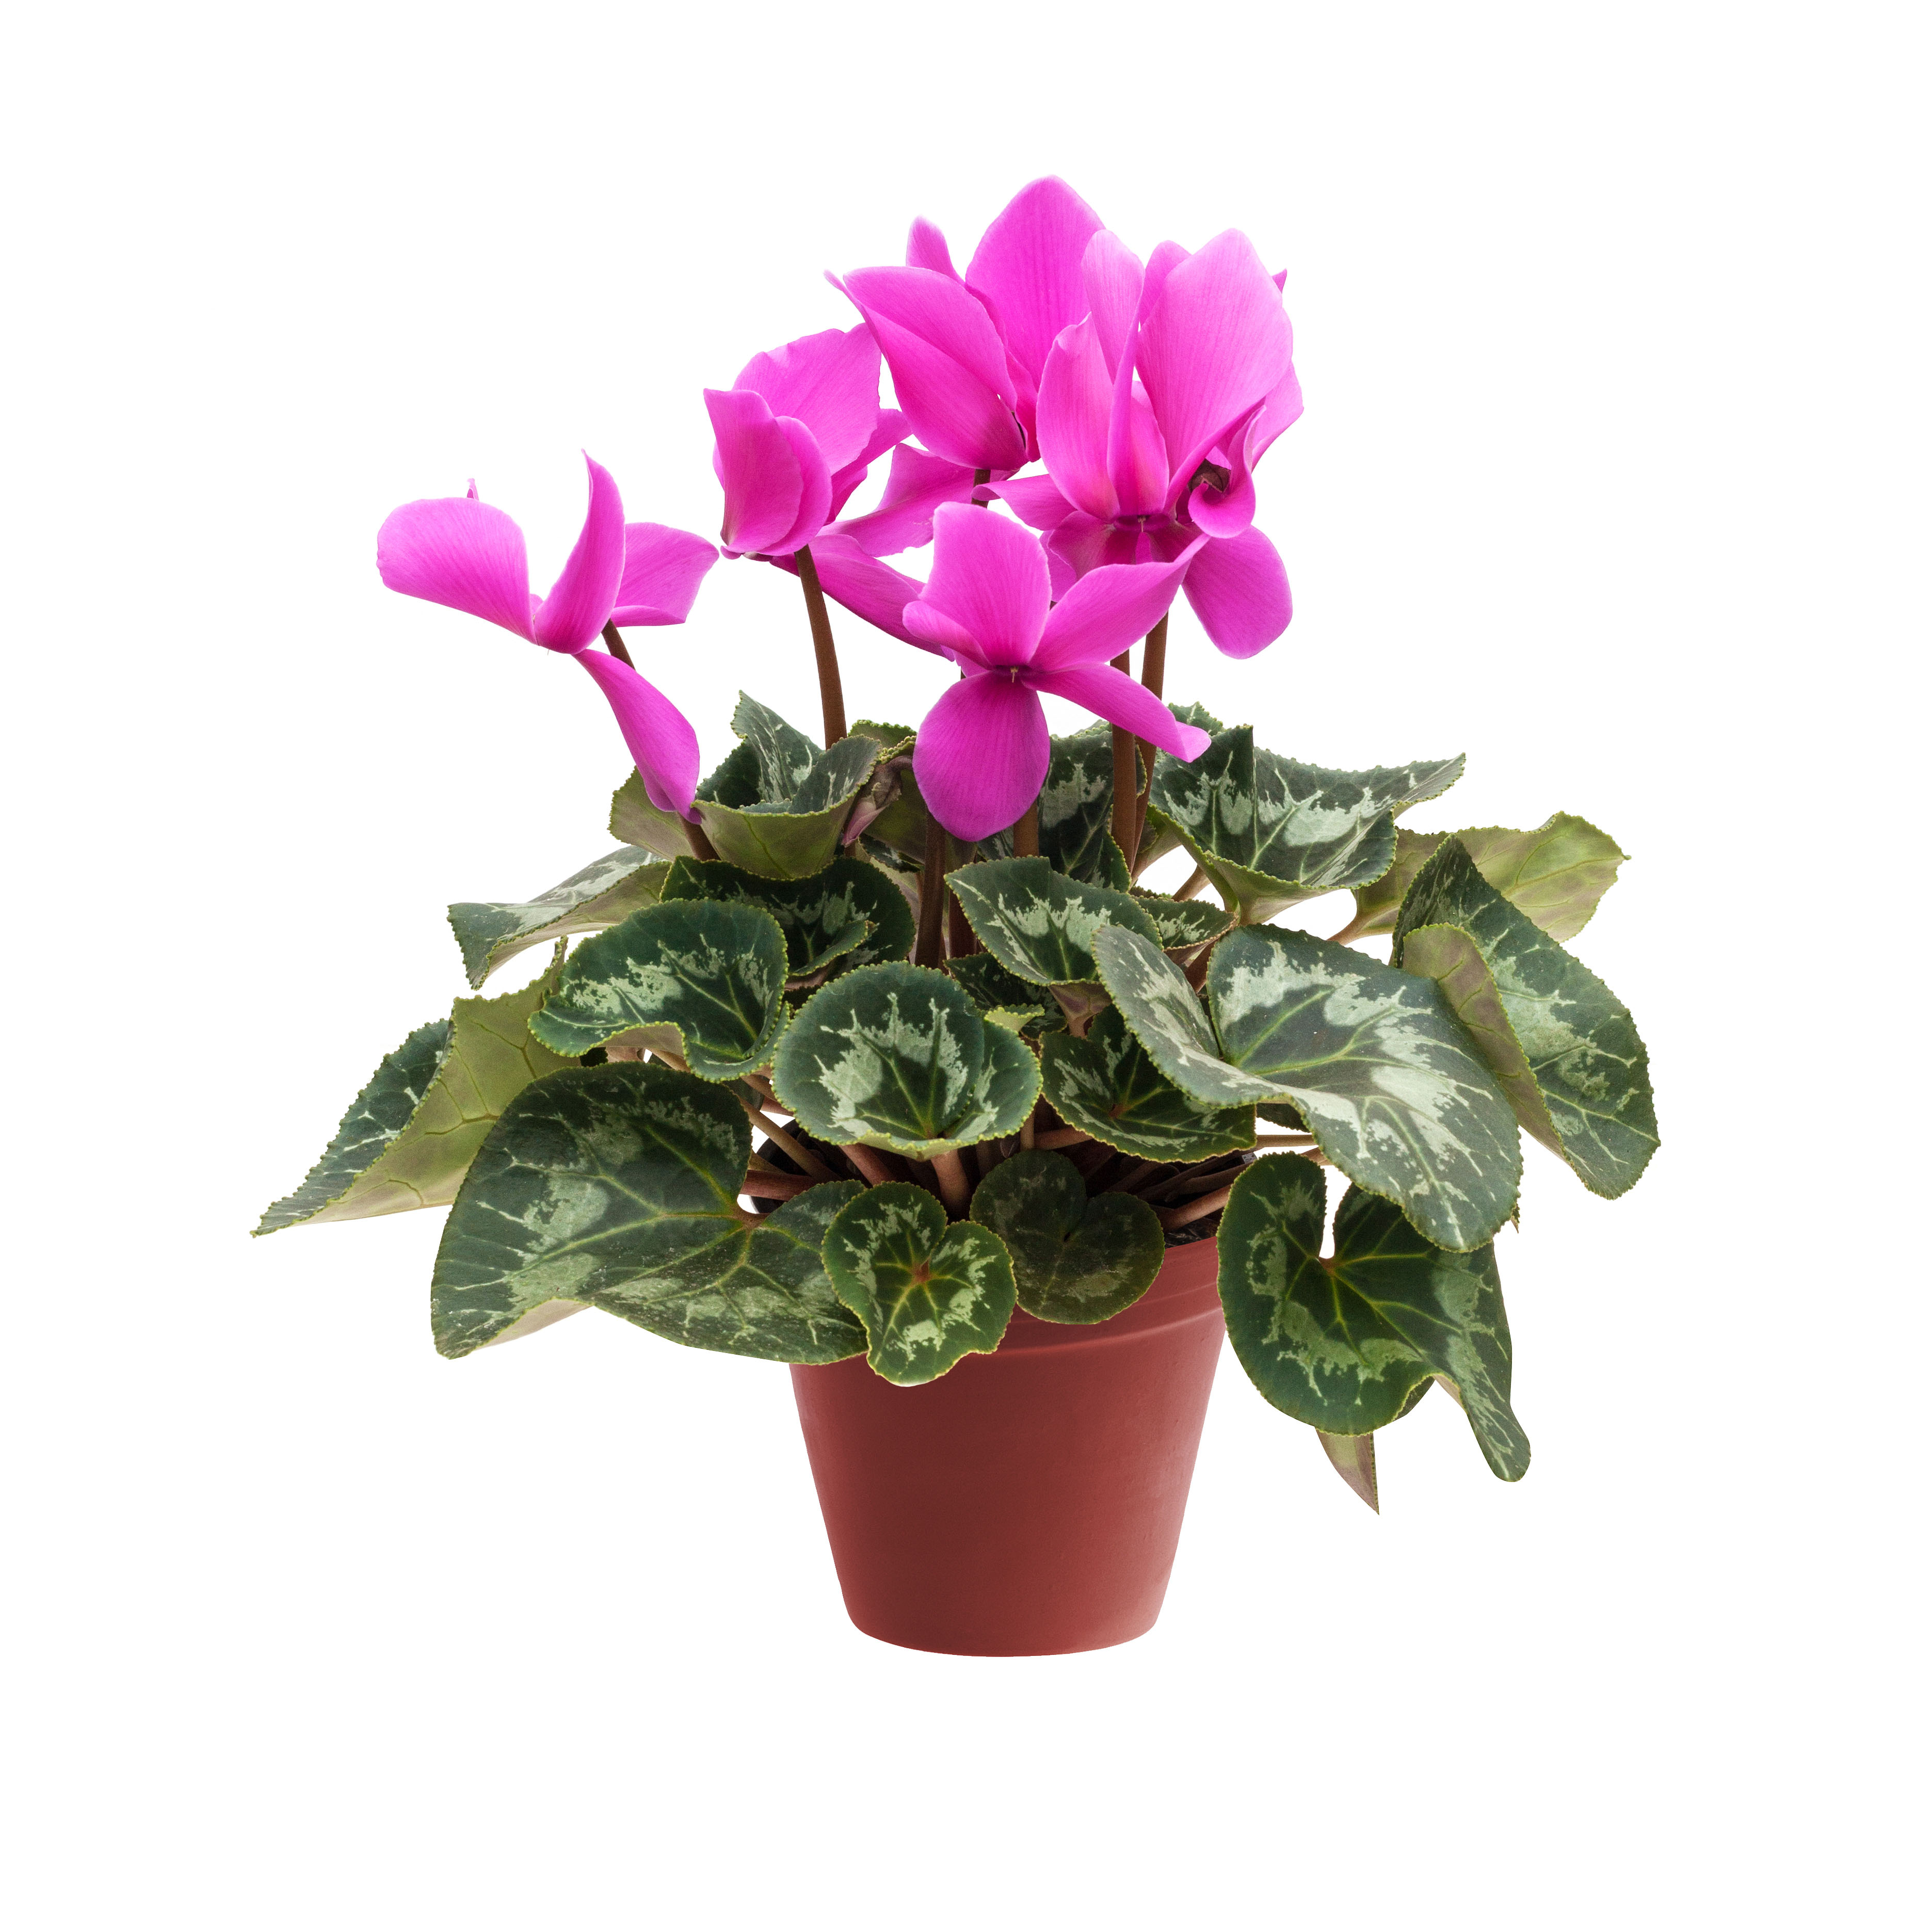 Pink cyclamen in a flower pot isolated on a white background close-up